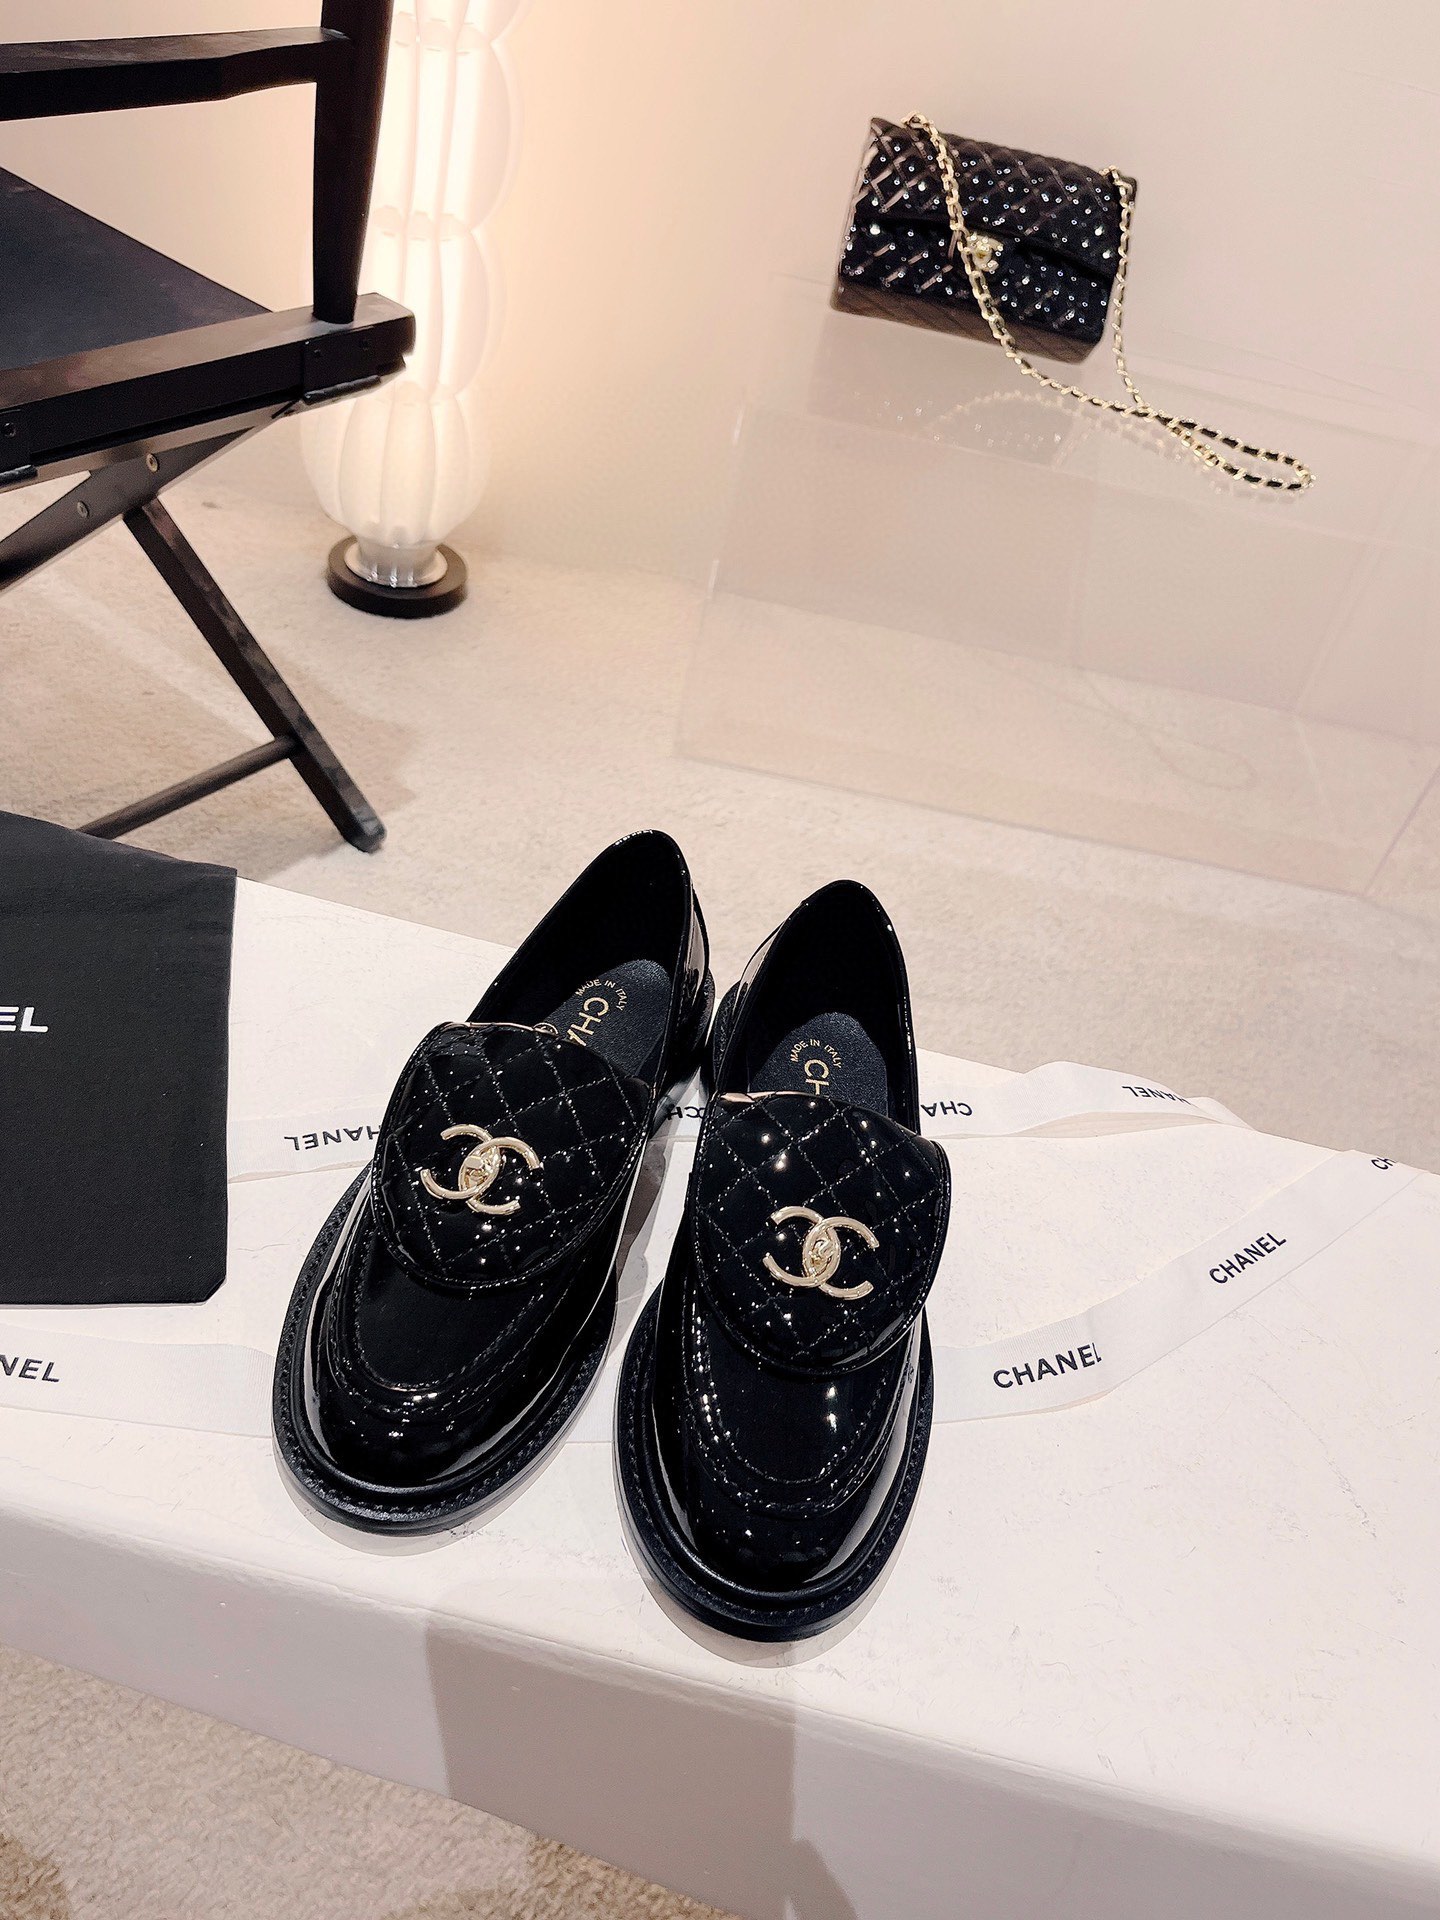 Chanel Shoes Loafers Corduroy Genuine Leather Sheepskin Fall Collection